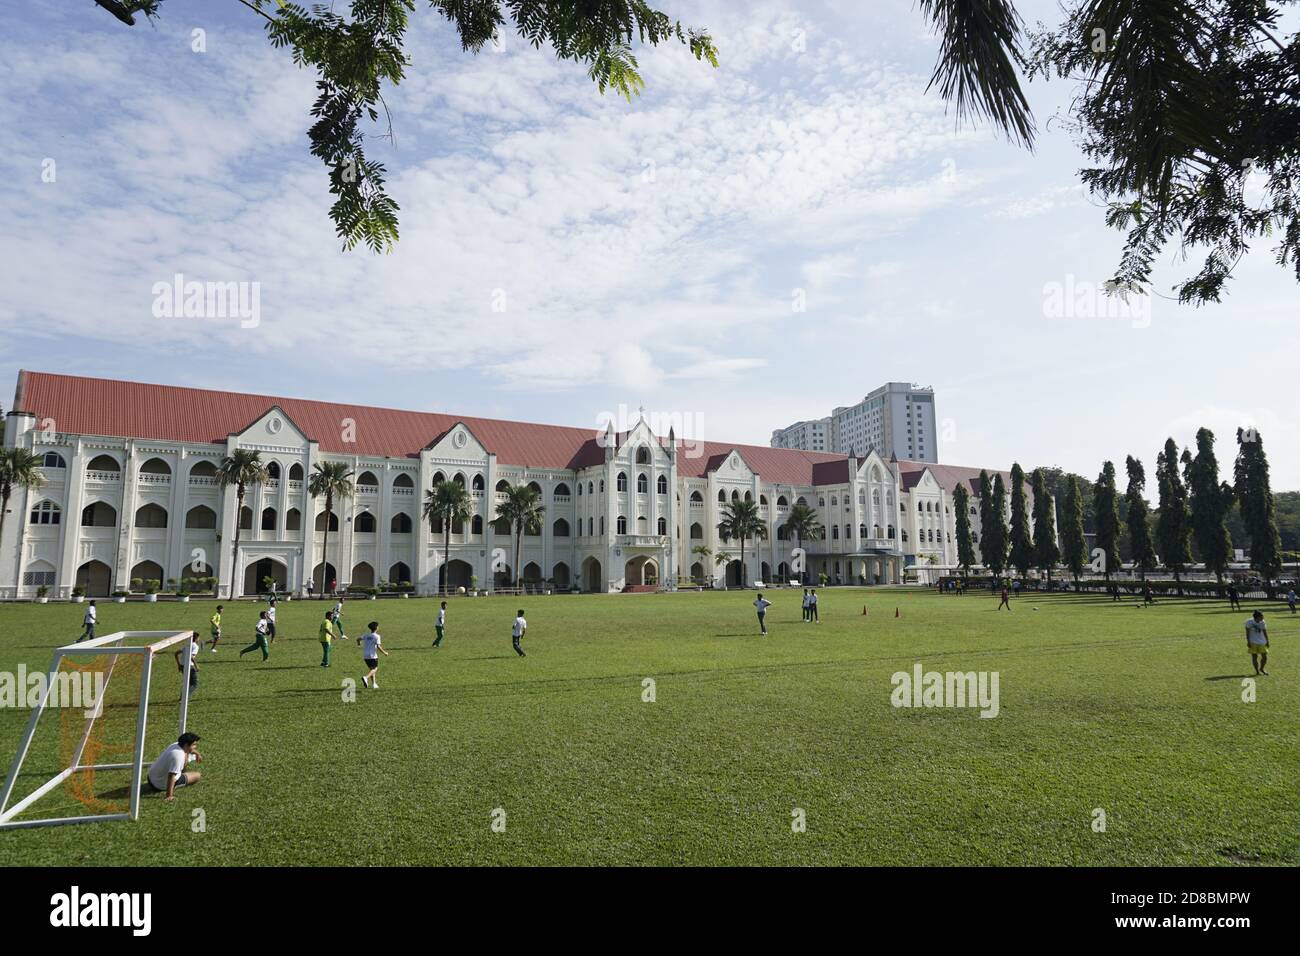 St Michael's Institution, Ipoh, Malaysia Stock Photo